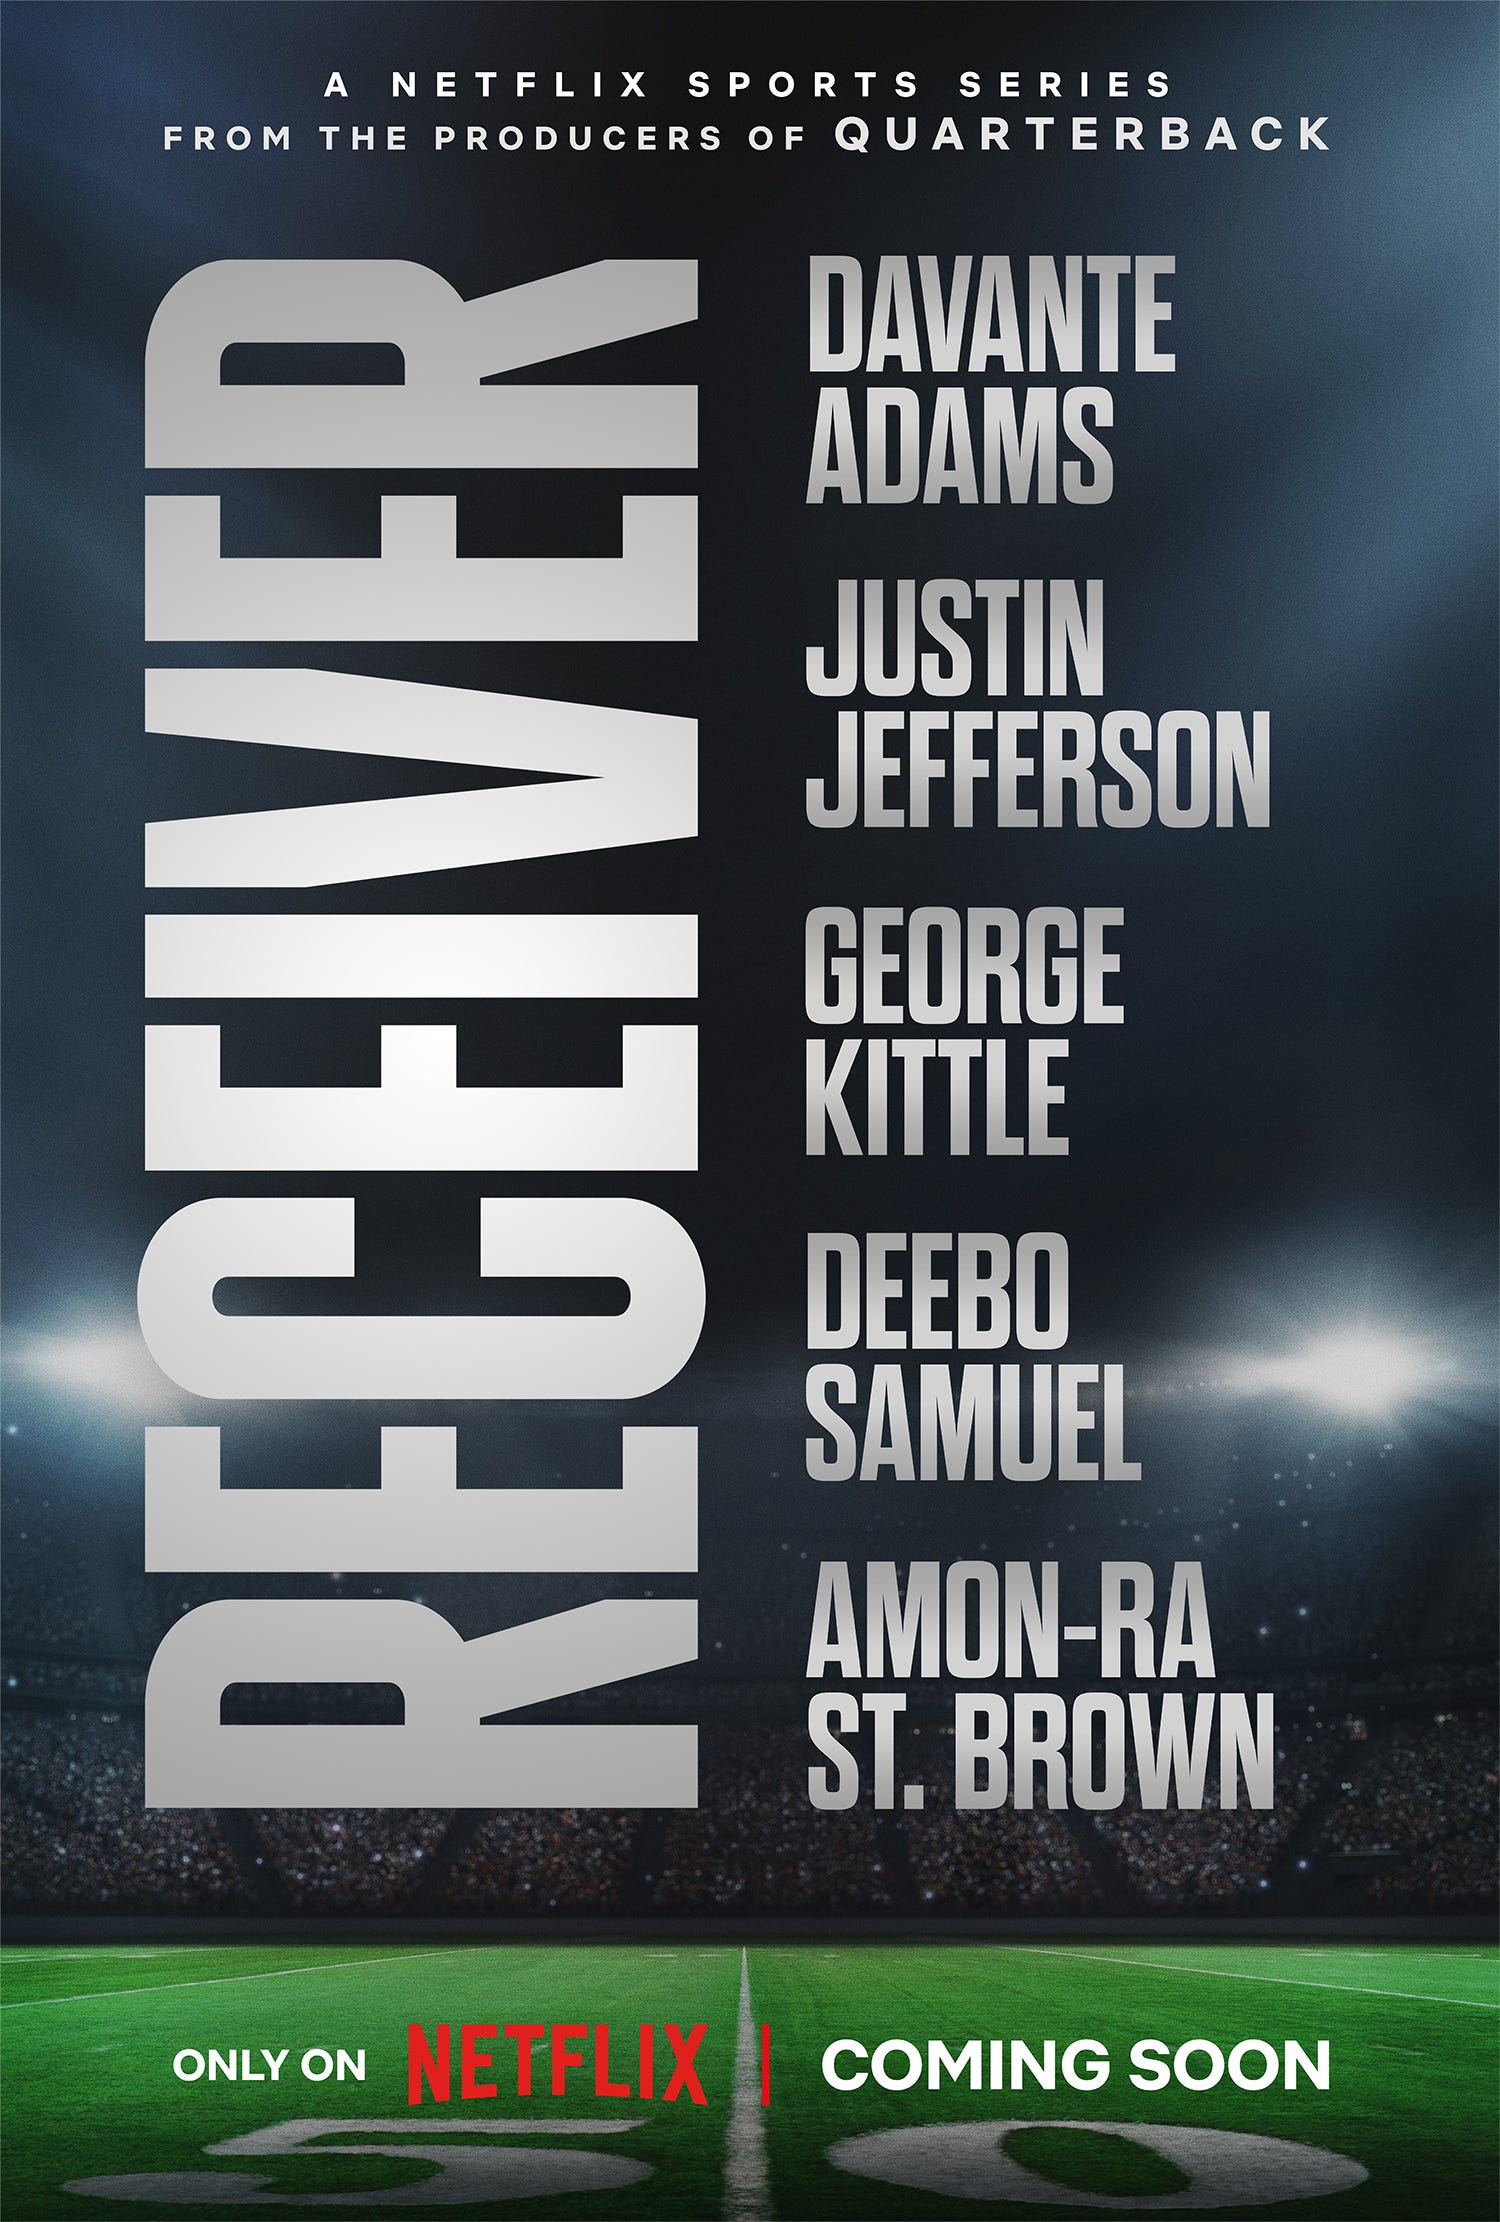 "Receiver" will launch this summer.